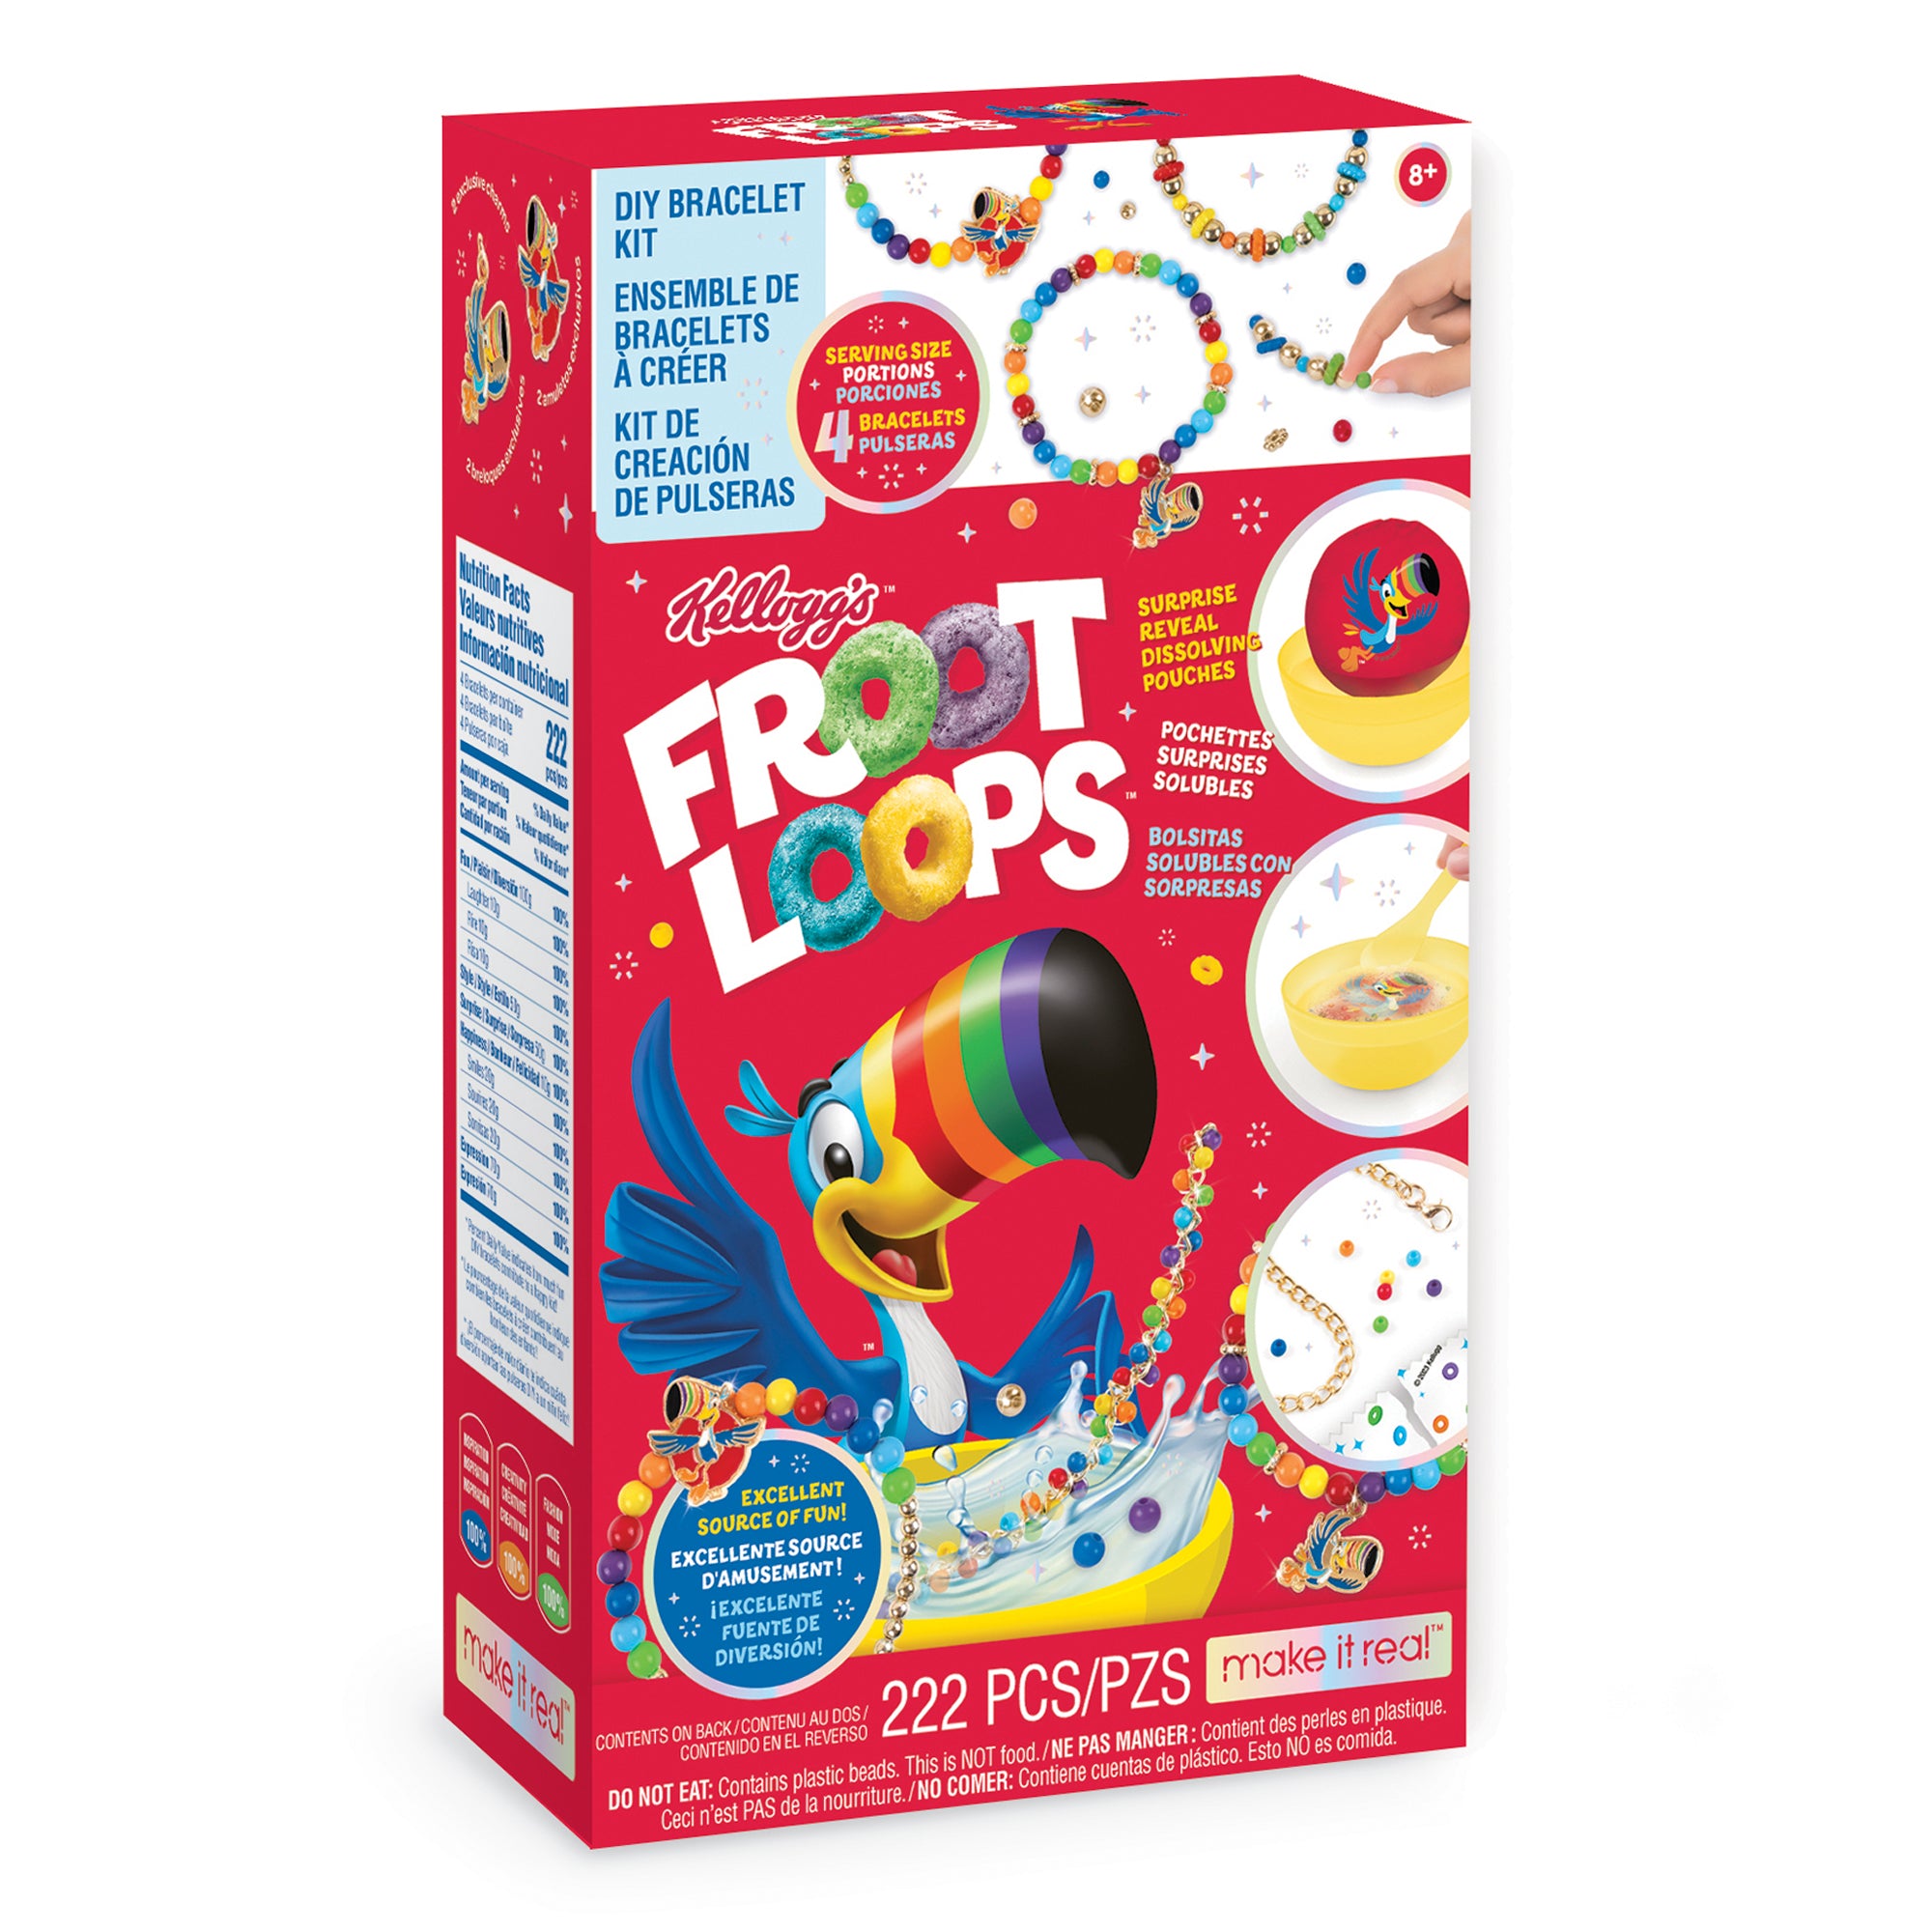 Make It Real: Kellogg's Cearlsly Cute - Frosted Flakes - DIY Bracelet Kit,  183 pcs, Tony The Tiger Charms, Create 4 Cereal Themed Bracelets, Tweens